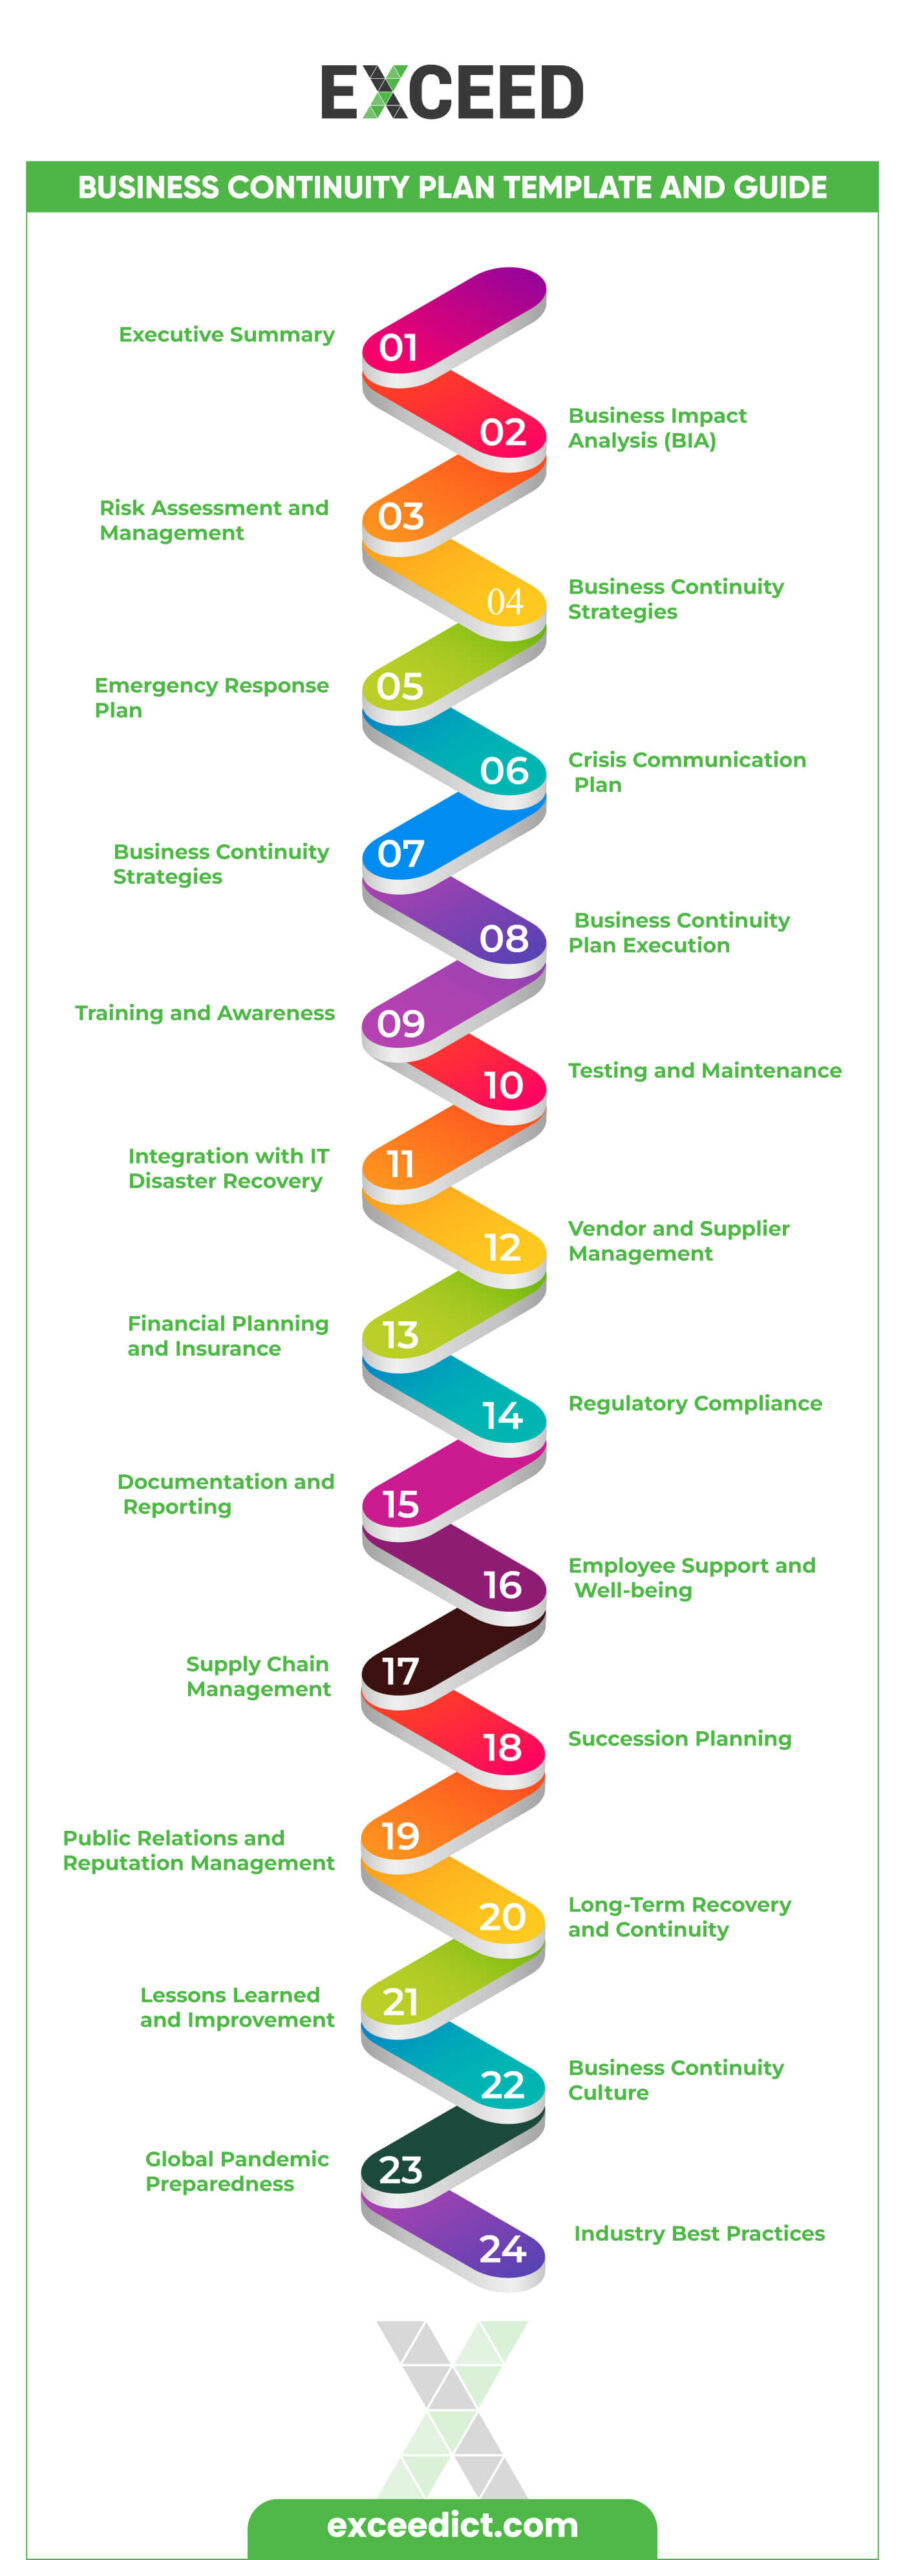 Business Continuity Plan Template and Guide